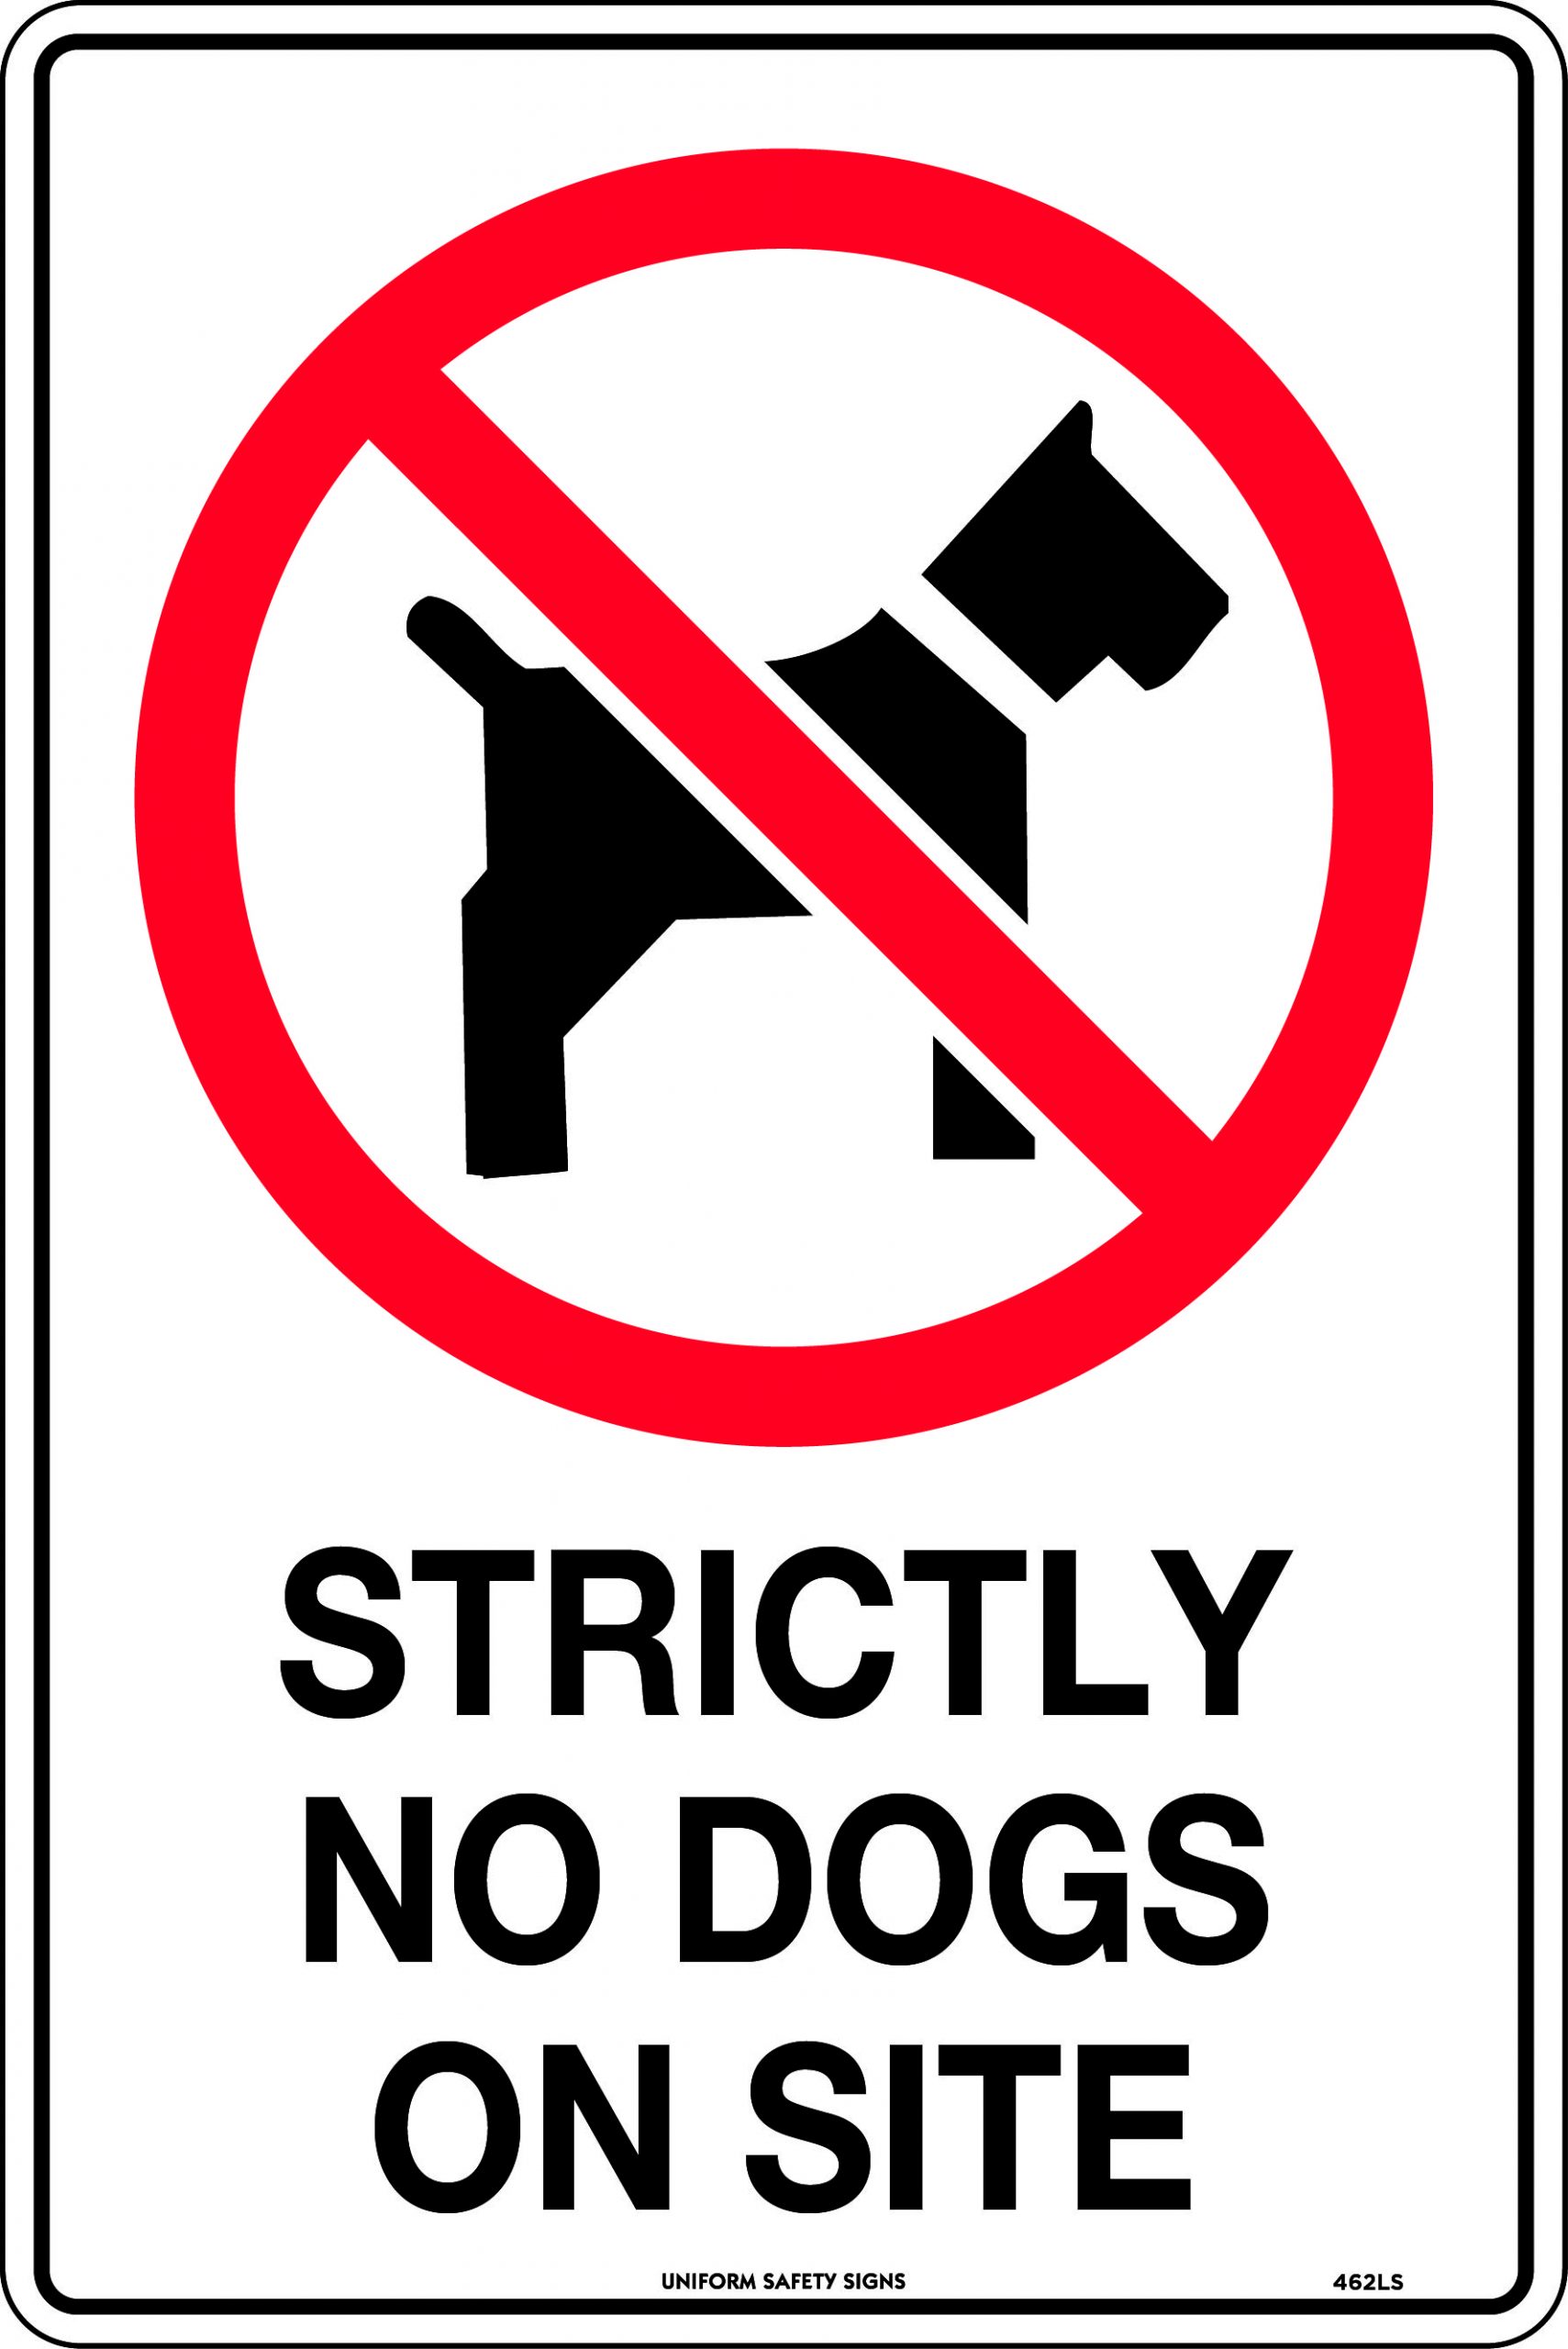 SIGN 450 X 300MM METAL STRICTLY NO DOGS ON SITE 